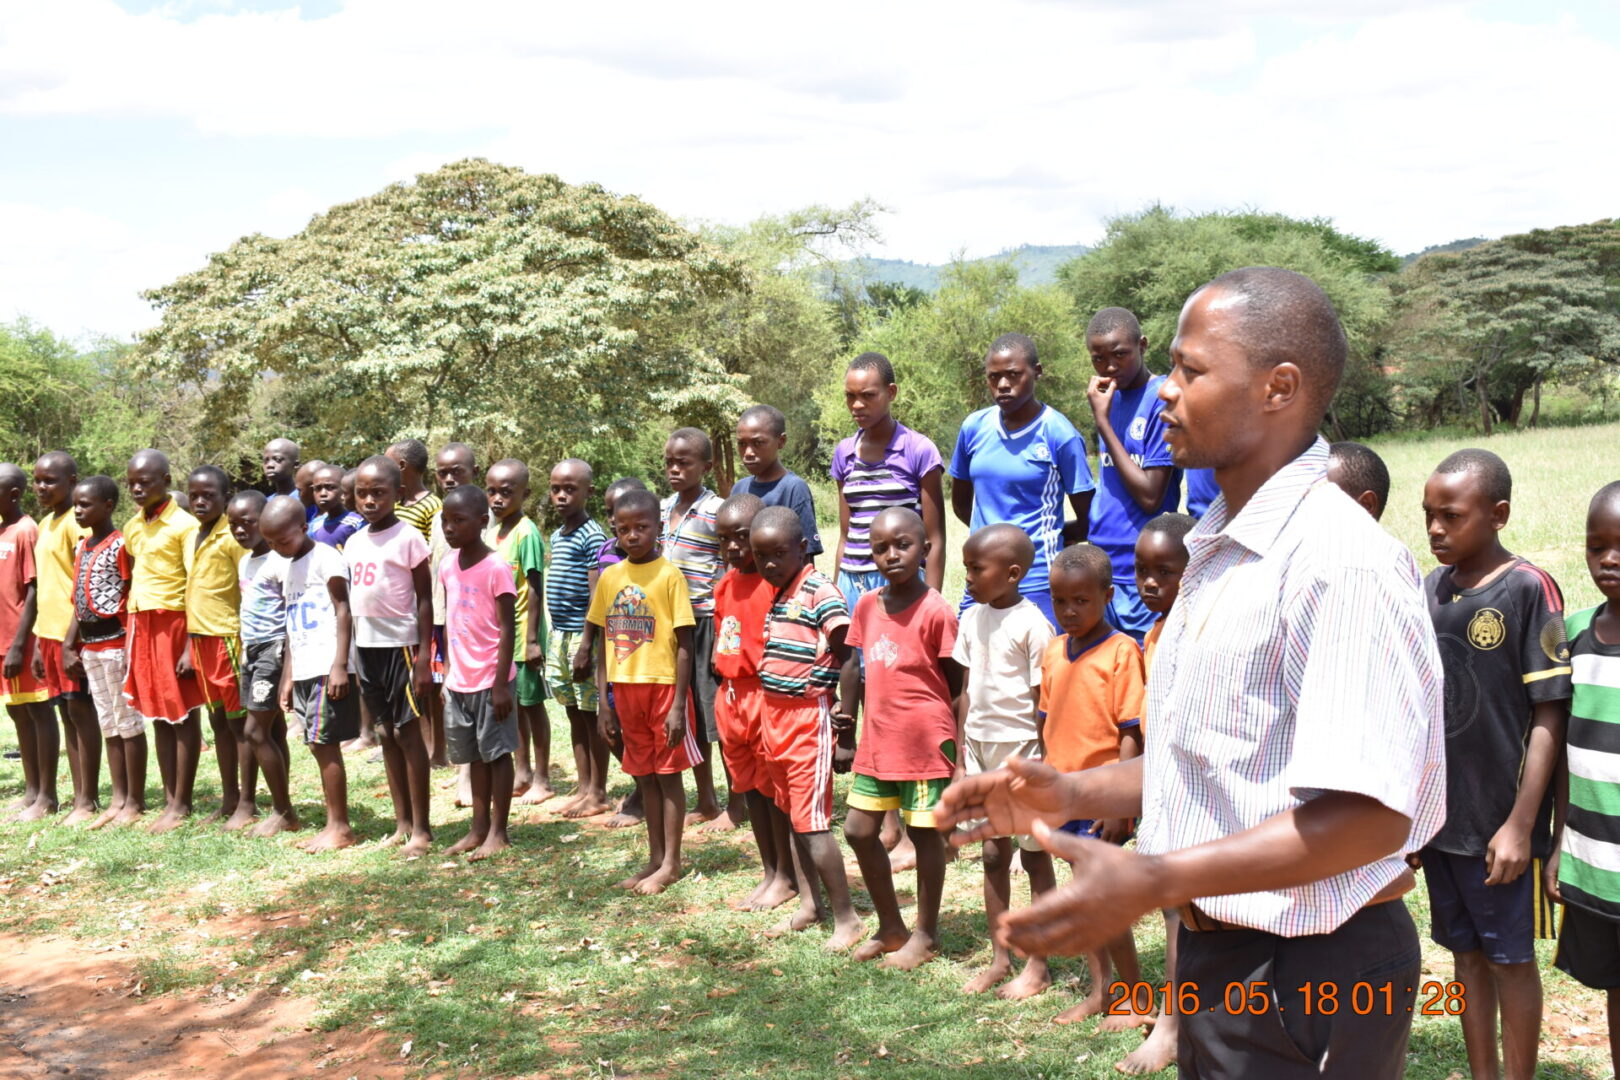 A man standing in front of a group of children.